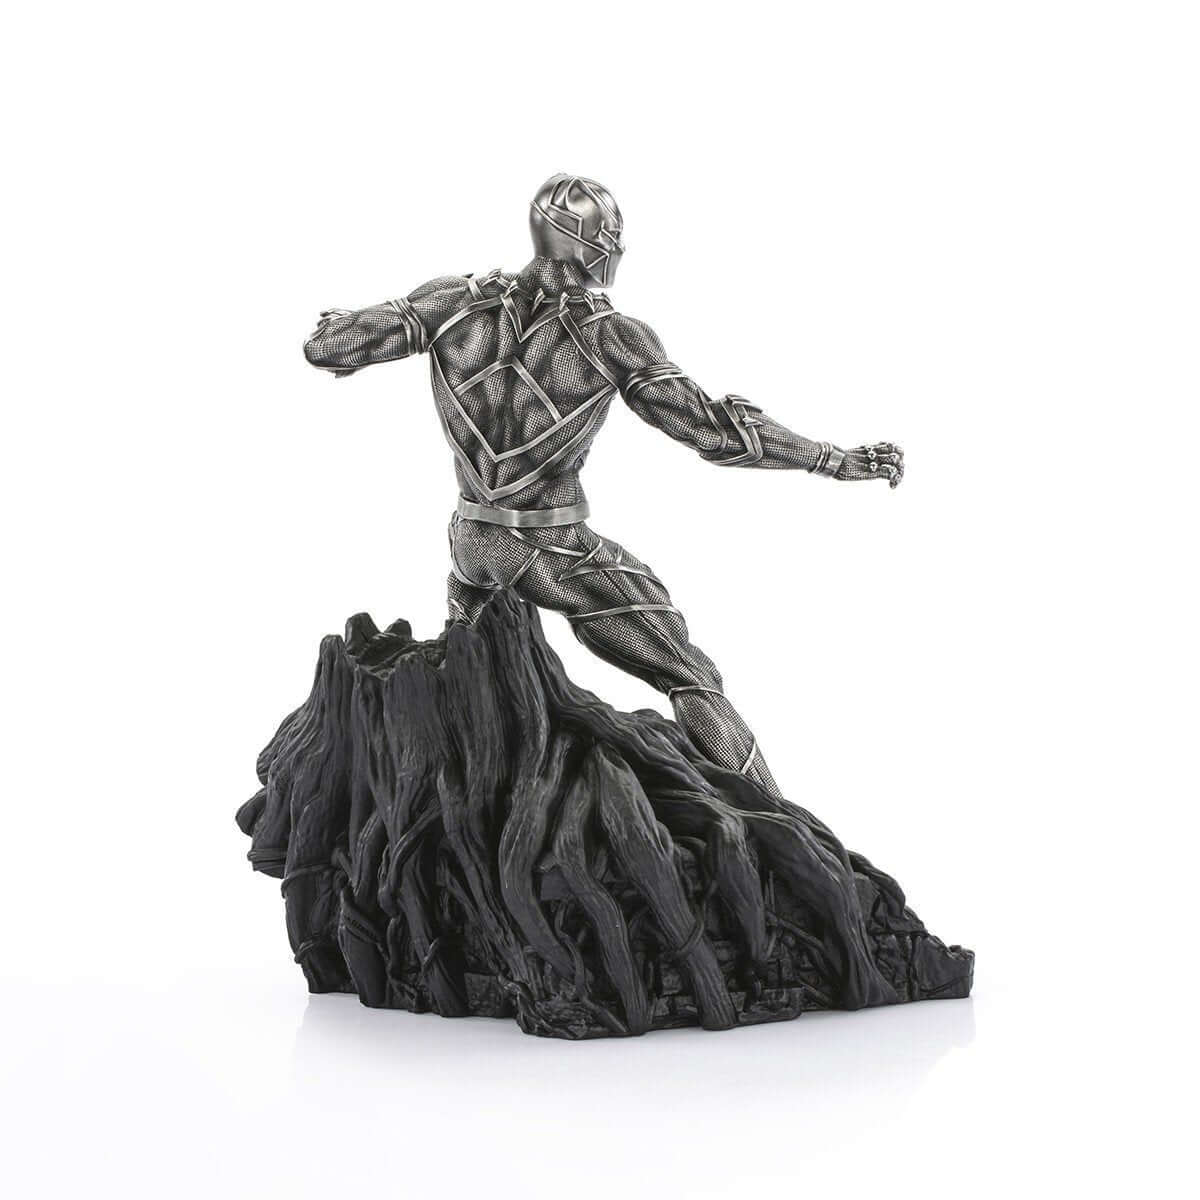 Black Panther Guardian Limited Edition Figurine - Marvel Statue